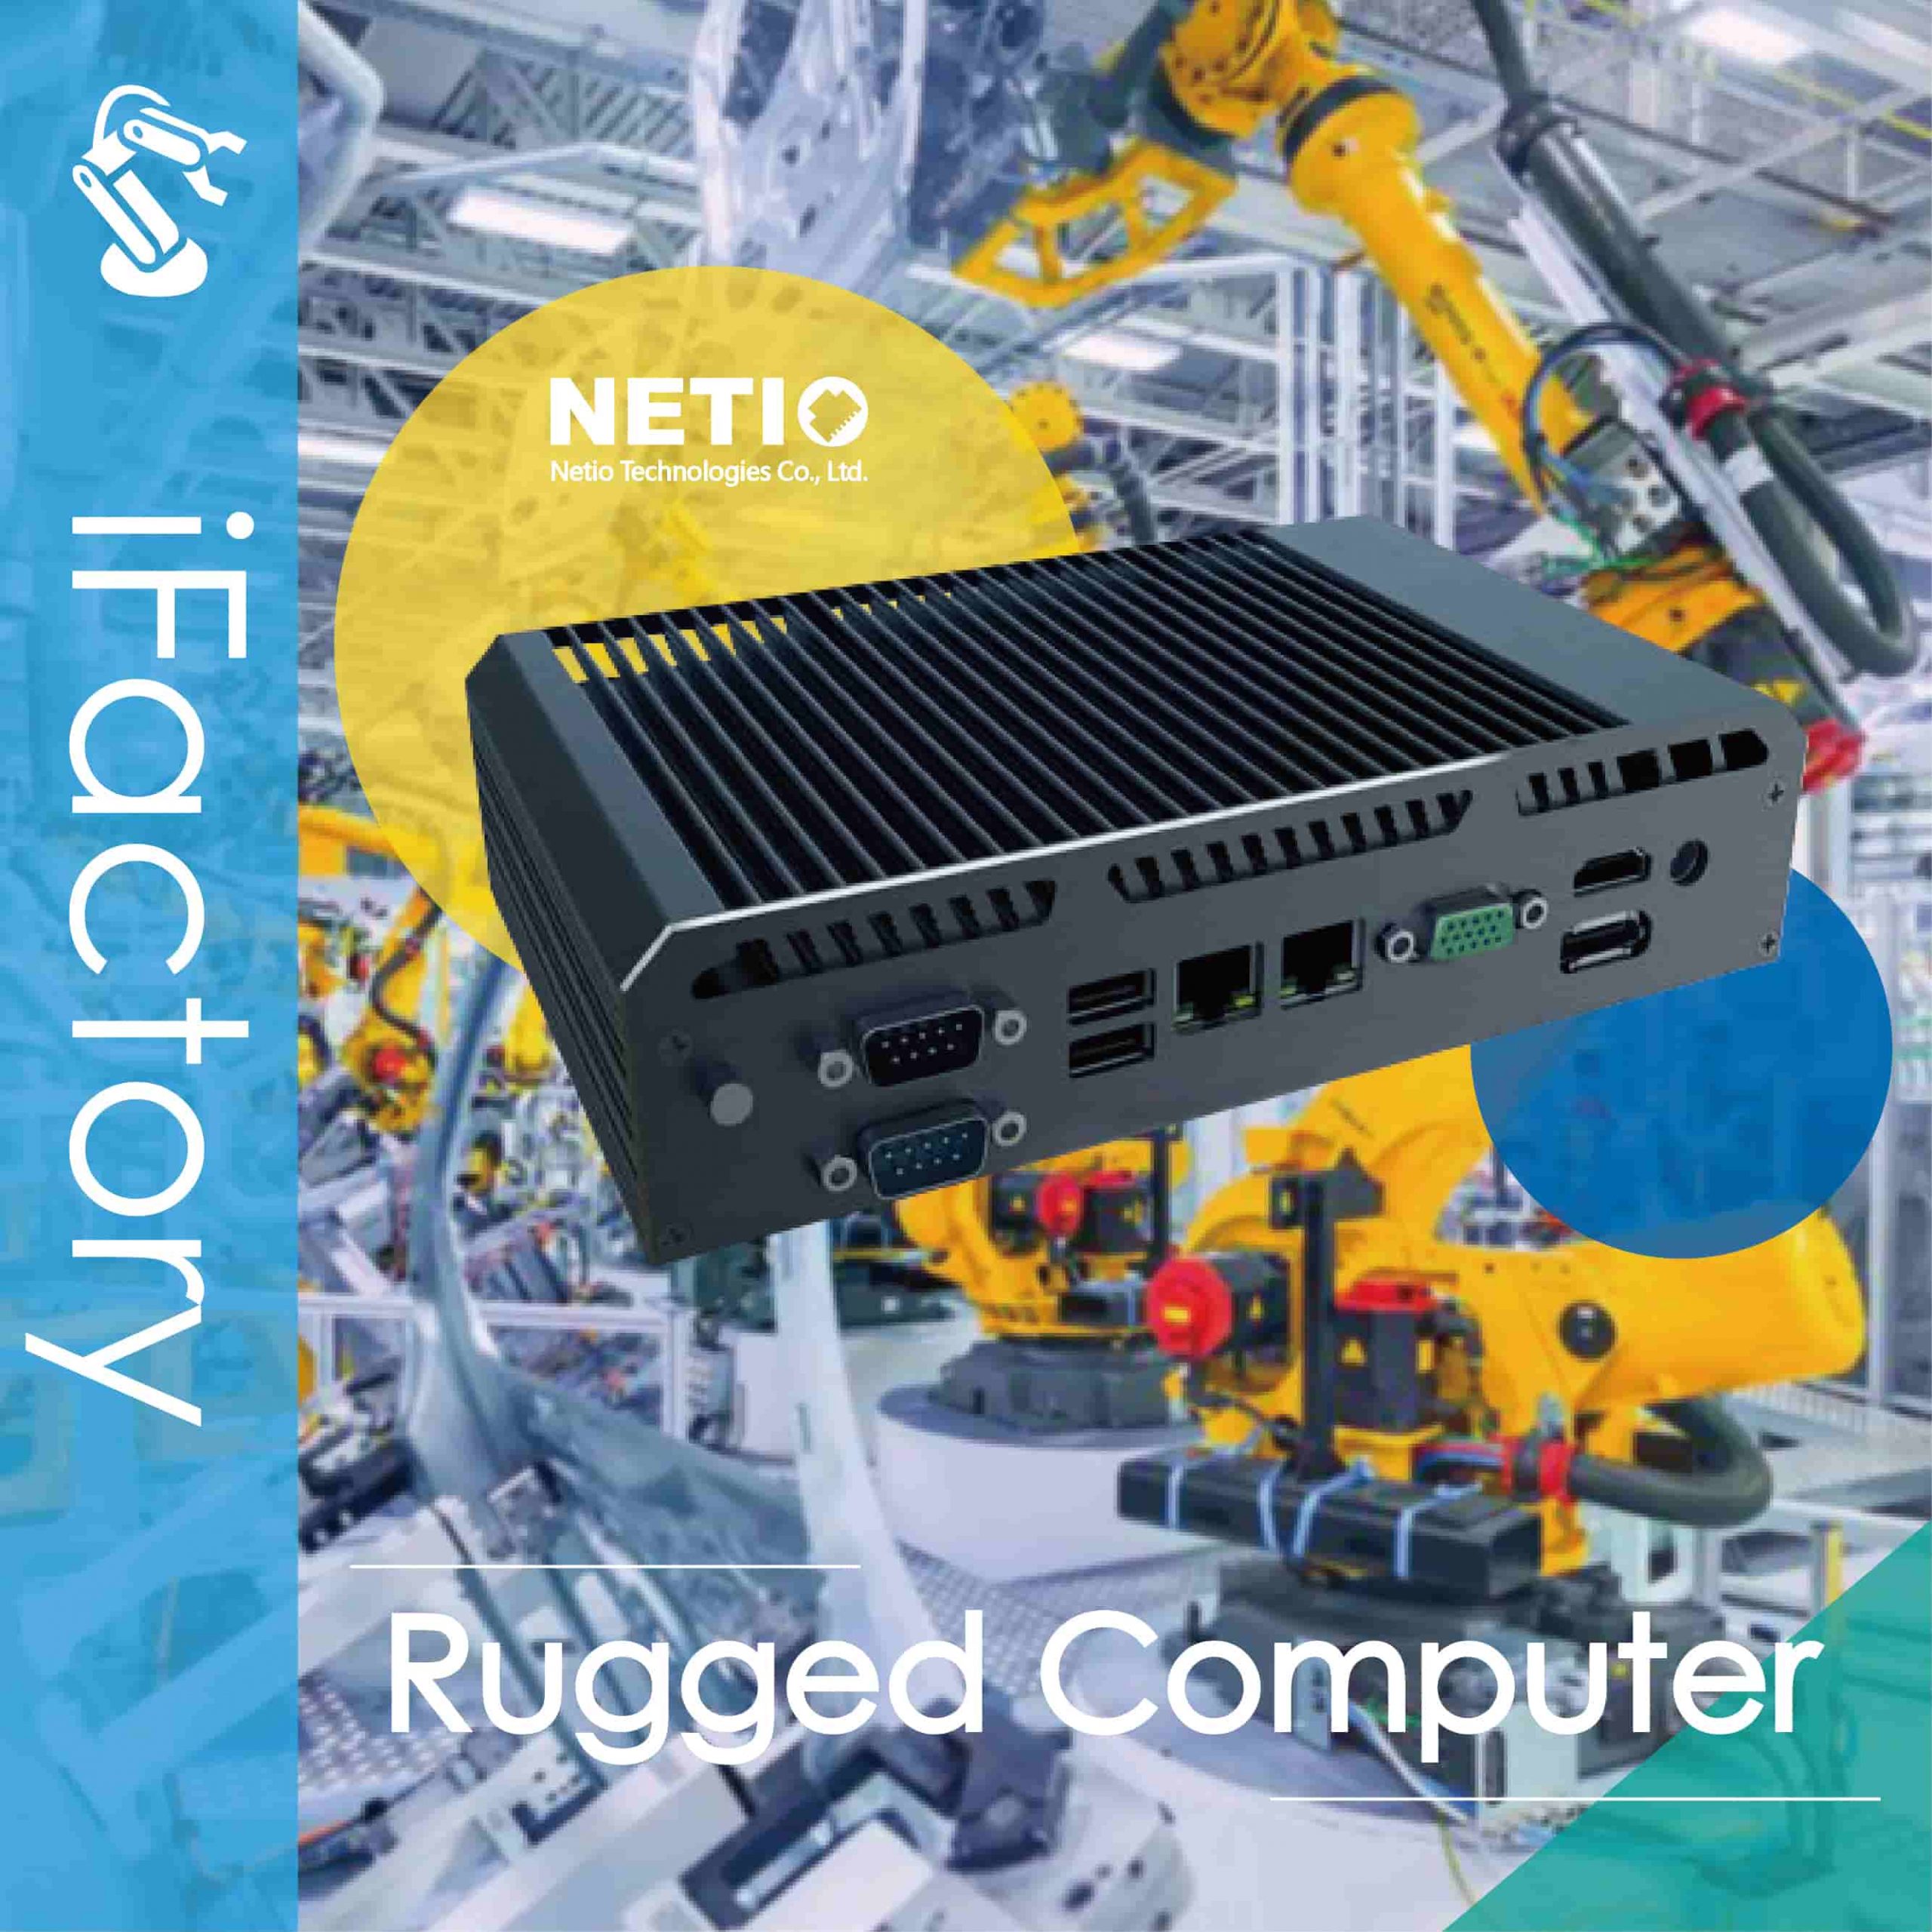 Rugged PC has demonstrated experience in industrial-grade applications in machine automation, marine, transportation